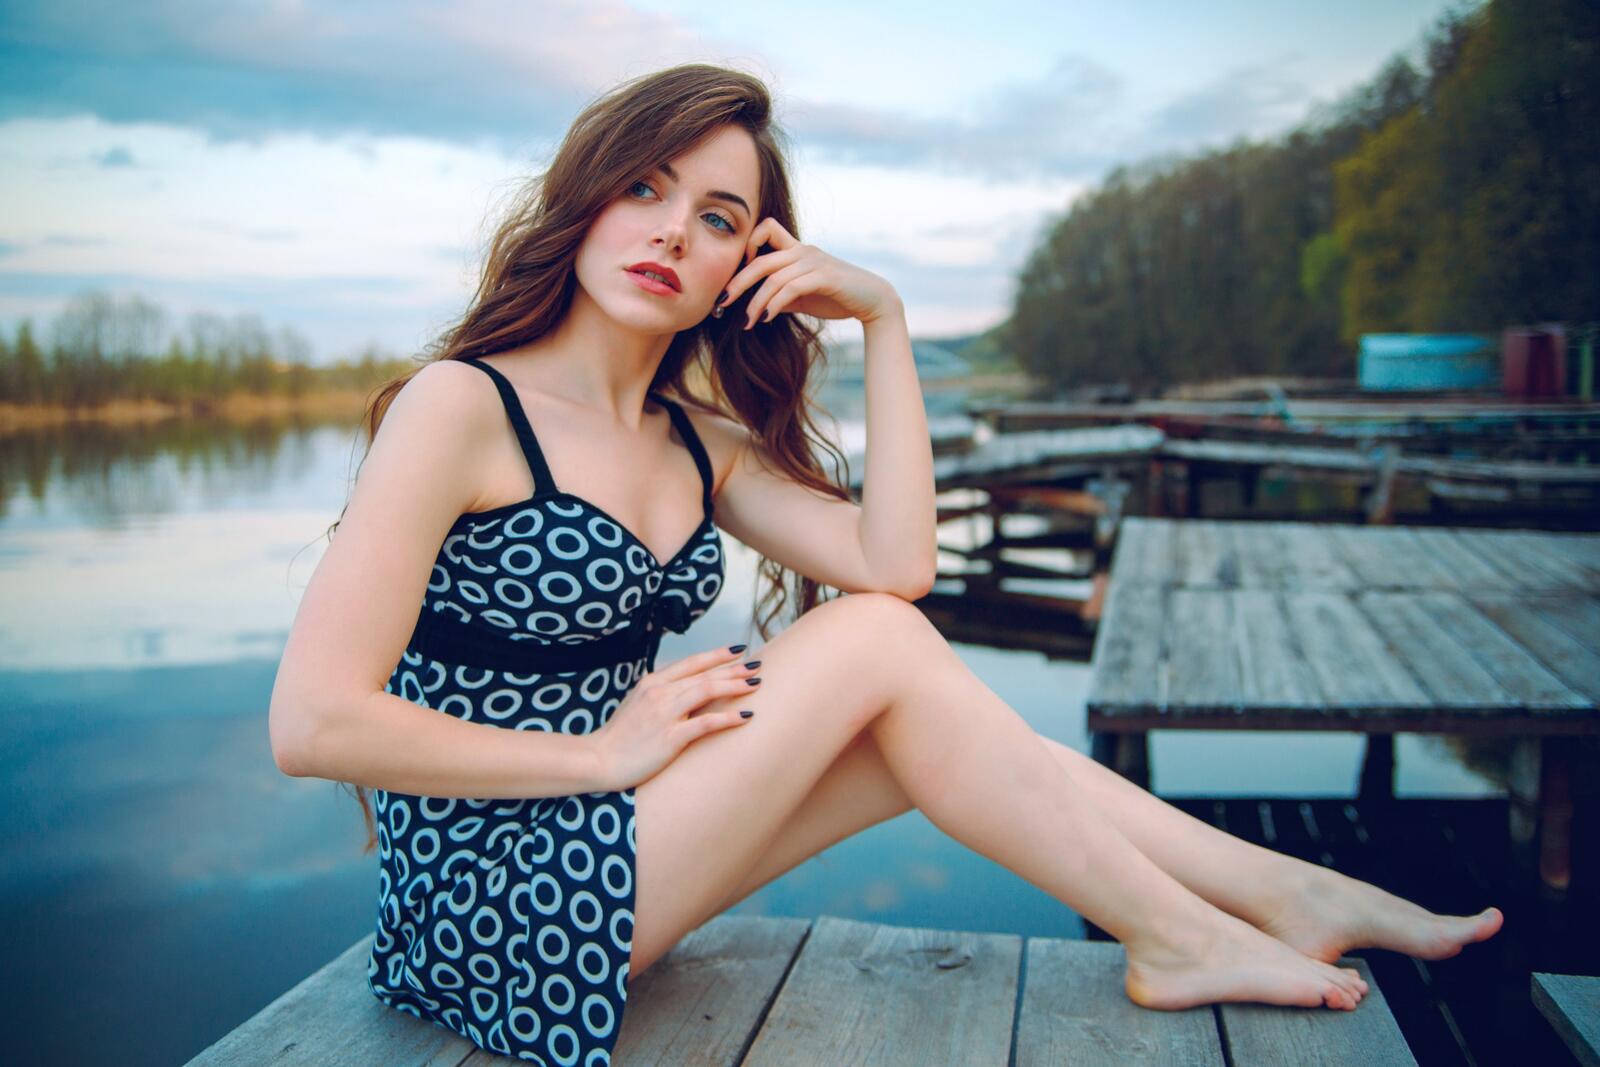 Free photo A girl in an evening dress sits on a wooden bridge